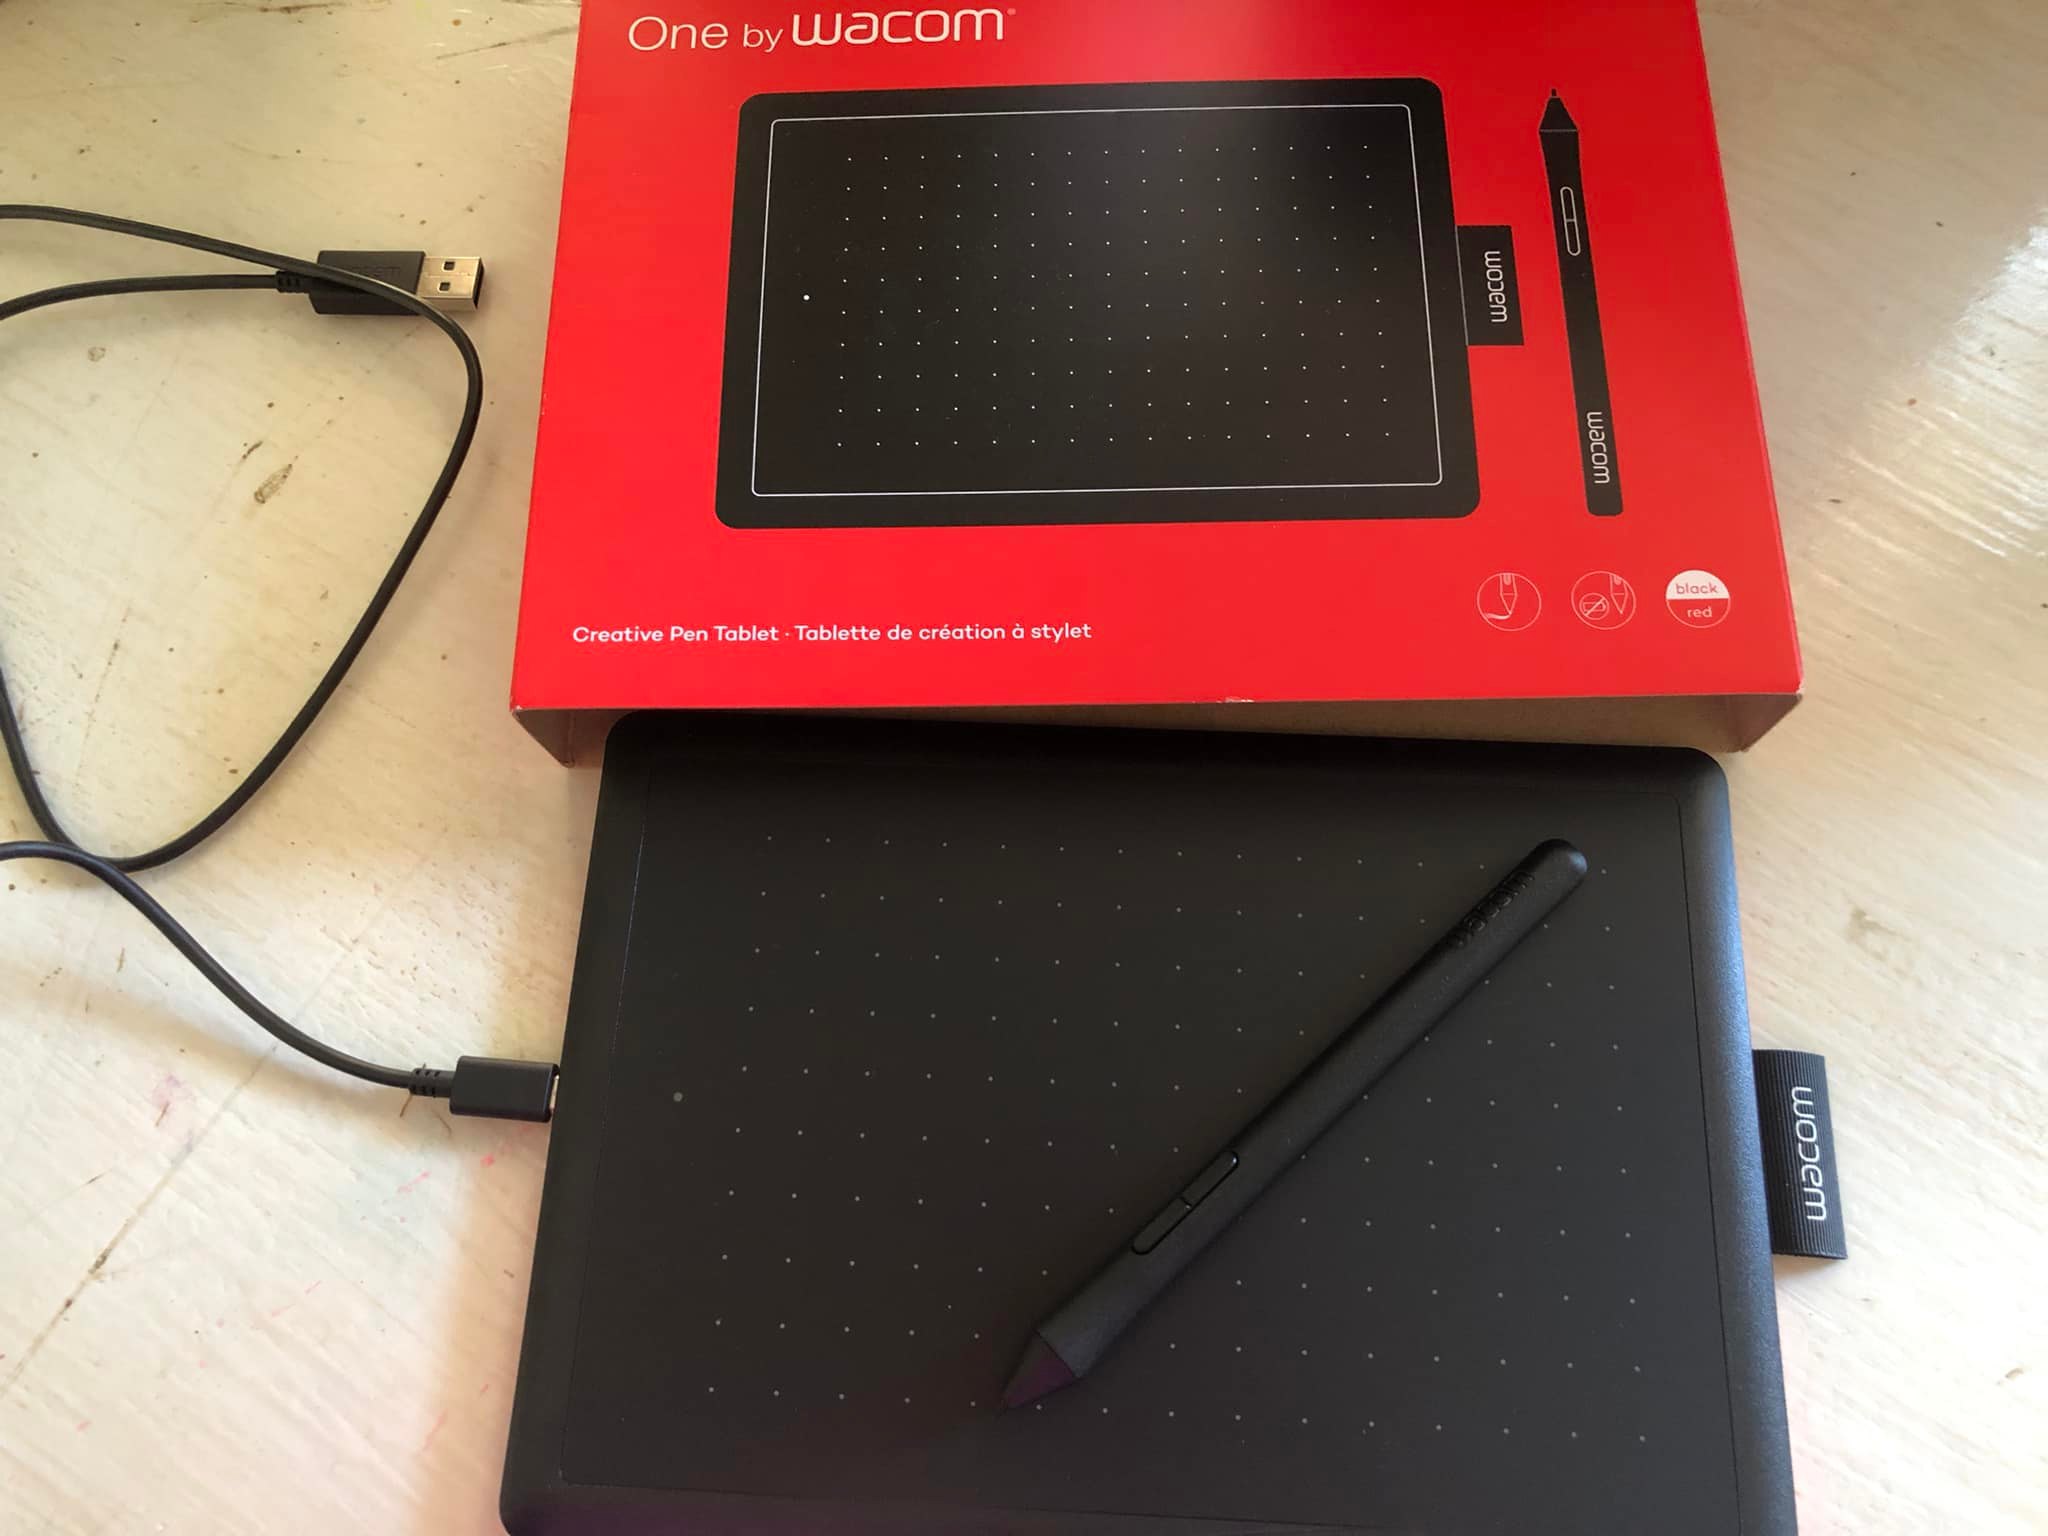 One by Wacom a Digital Drawing Tablet with a Precision Pen